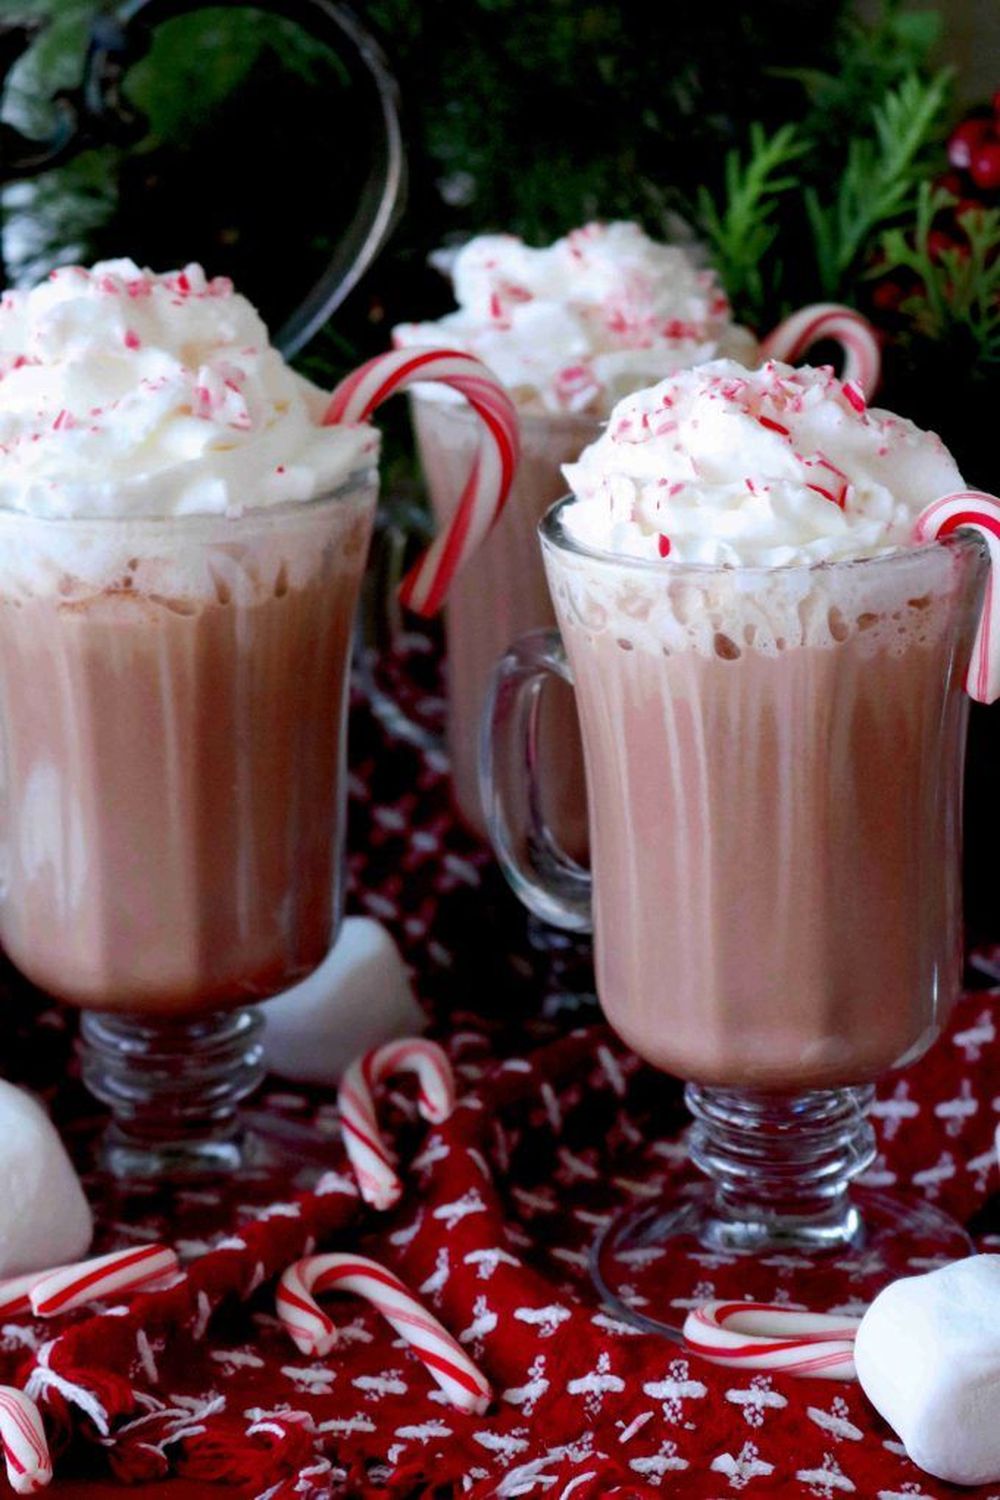 Spiked hot chocolate thanksgiving desserts 